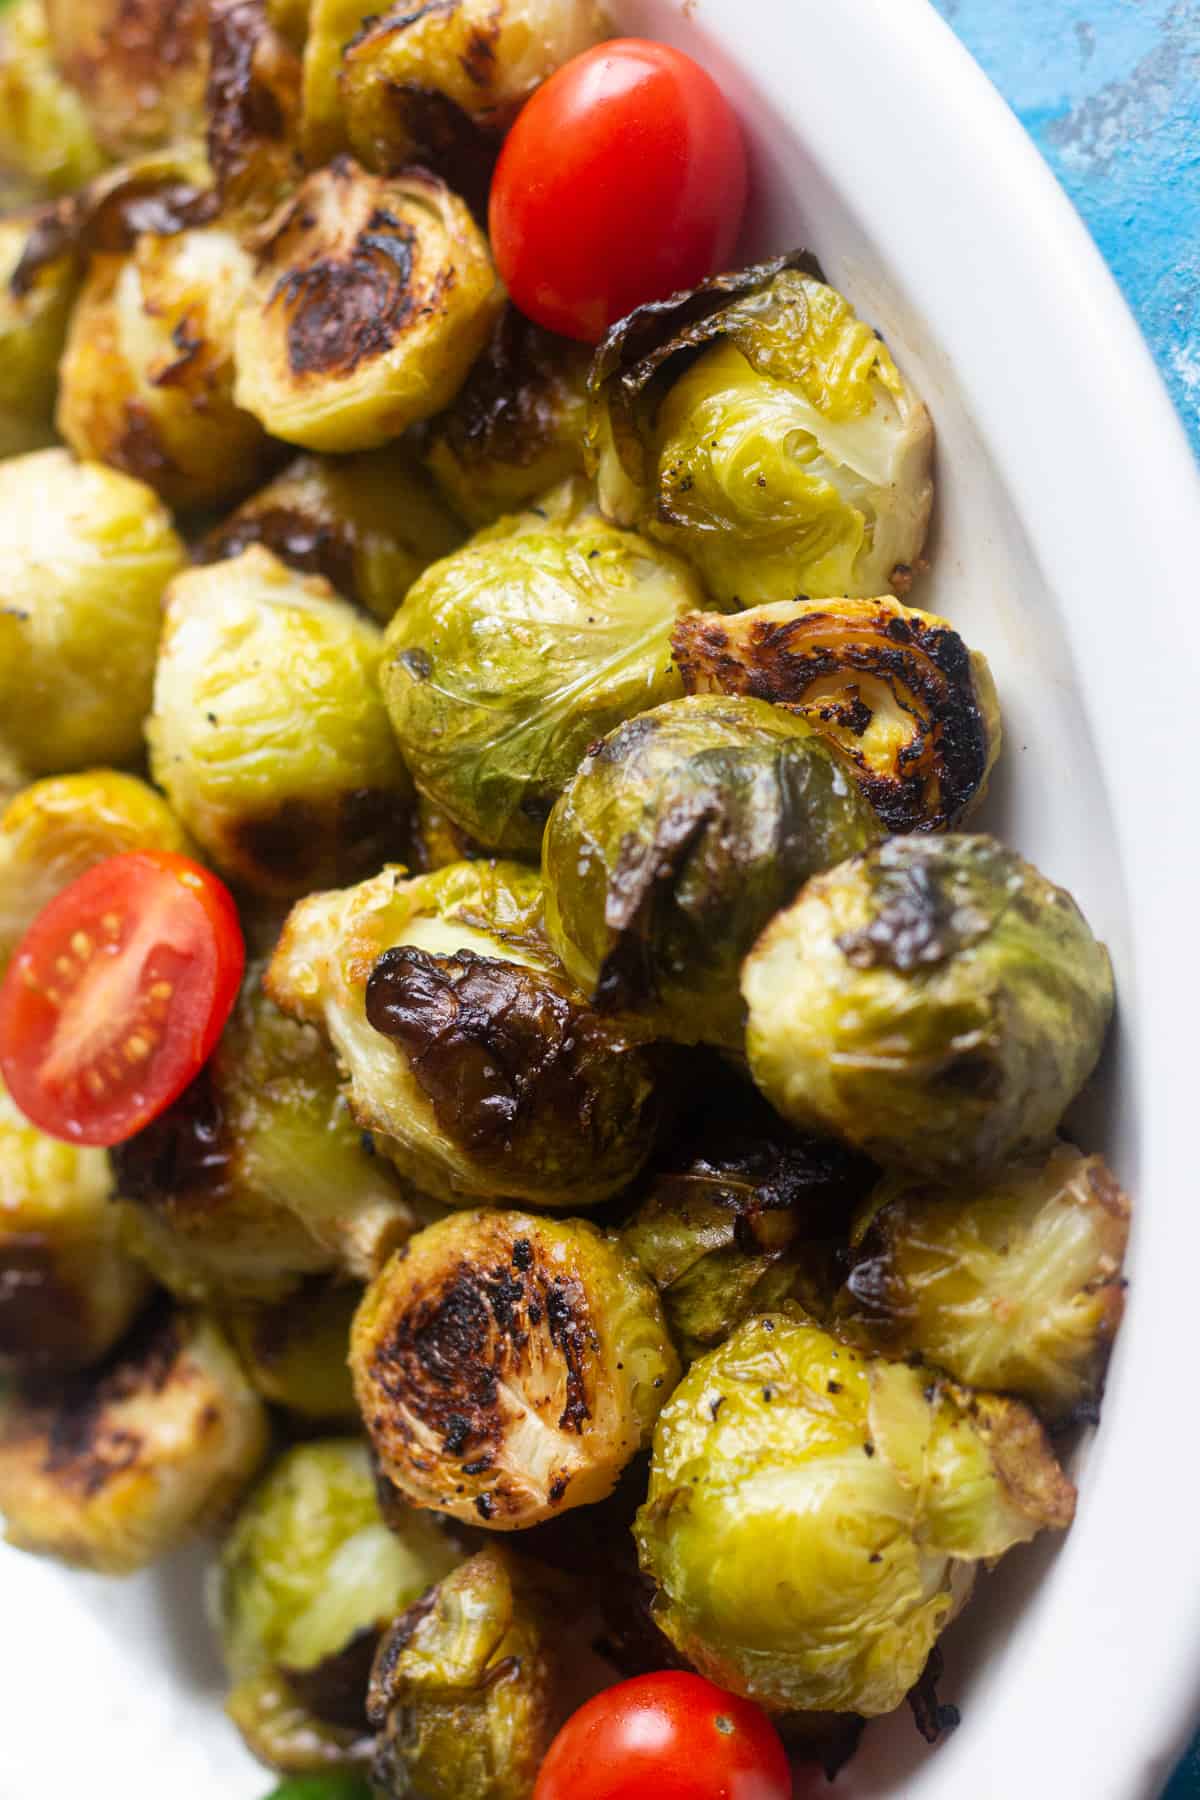 Top crispy sprouts with tomatoes for a pop of color. 